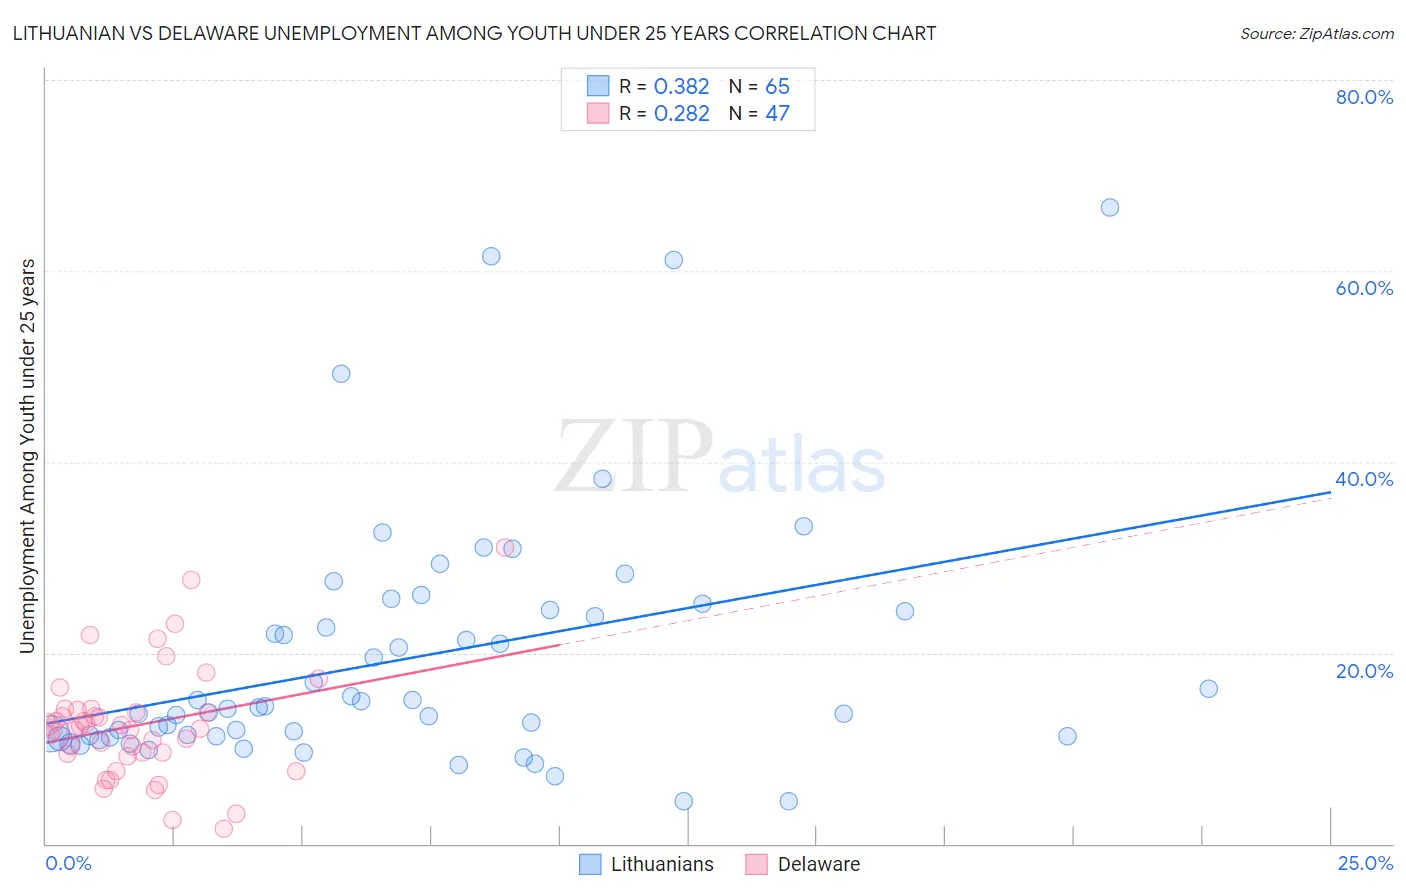 Lithuanian vs Delaware Unemployment Among Youth under 25 years